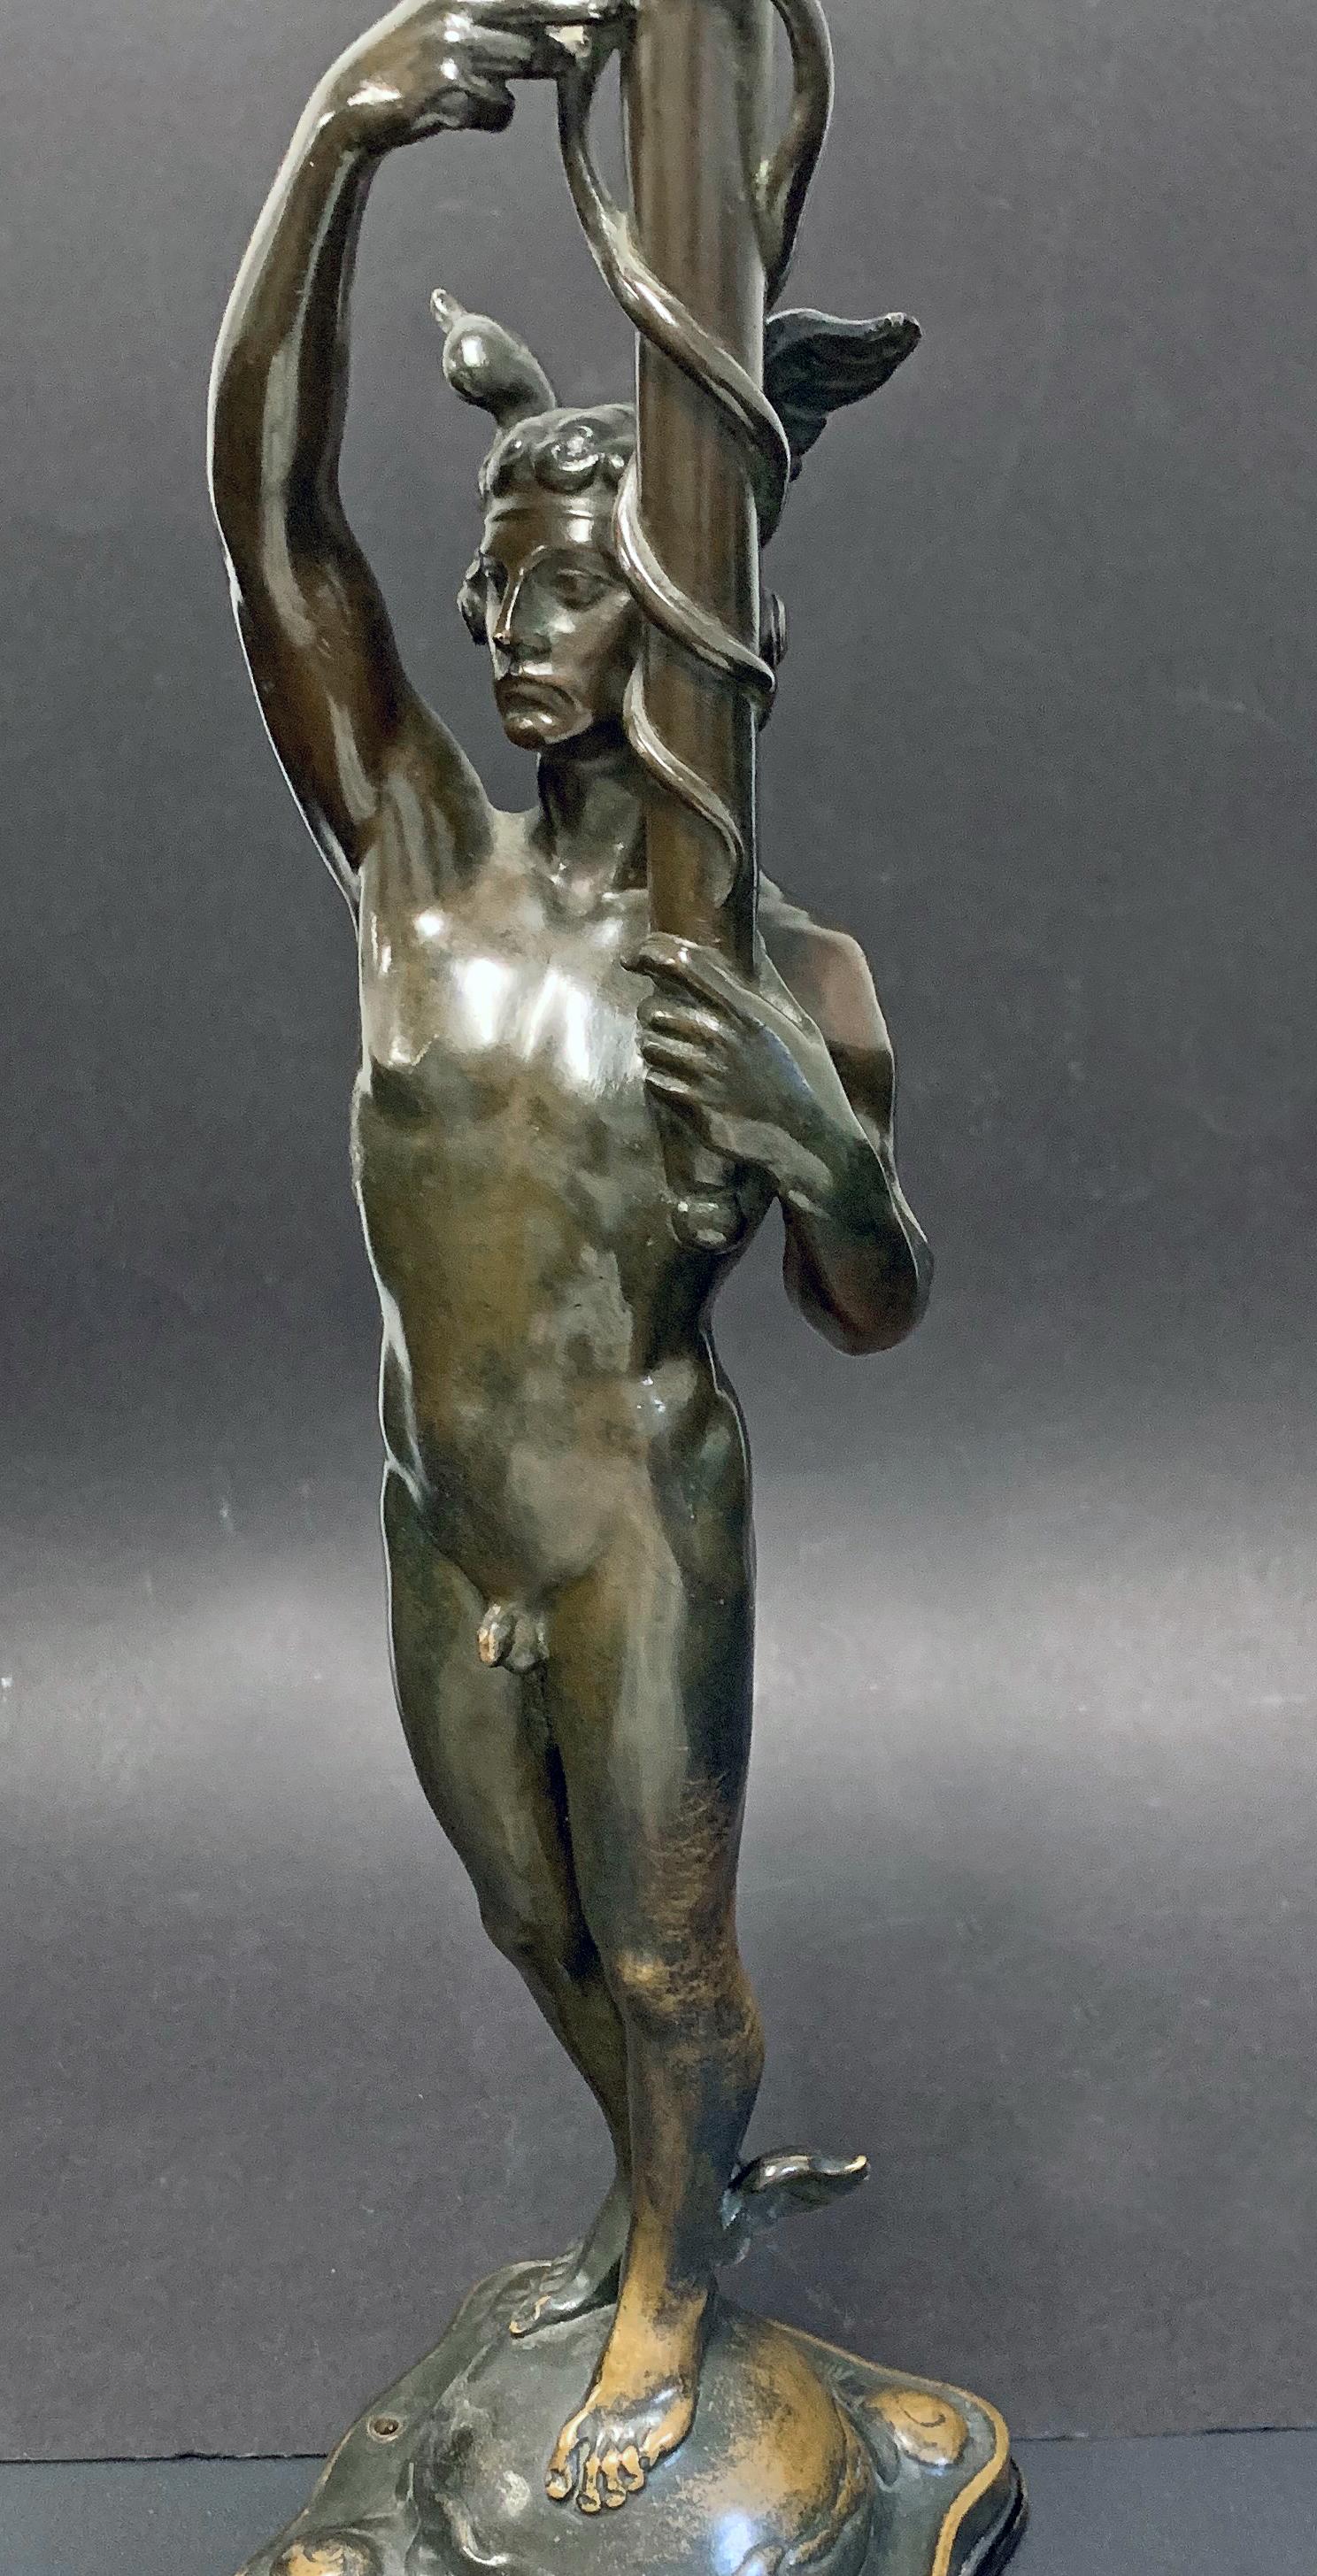 A large and impressive bronze depicting the nude god Mercury holding a large caduceus aloft, this piece was sculpted by Alfred Ohlson, a Swedish sculptor who was known for his sensuous figural bronzes in the 1910s and 1920s. Here he shows Mercury as